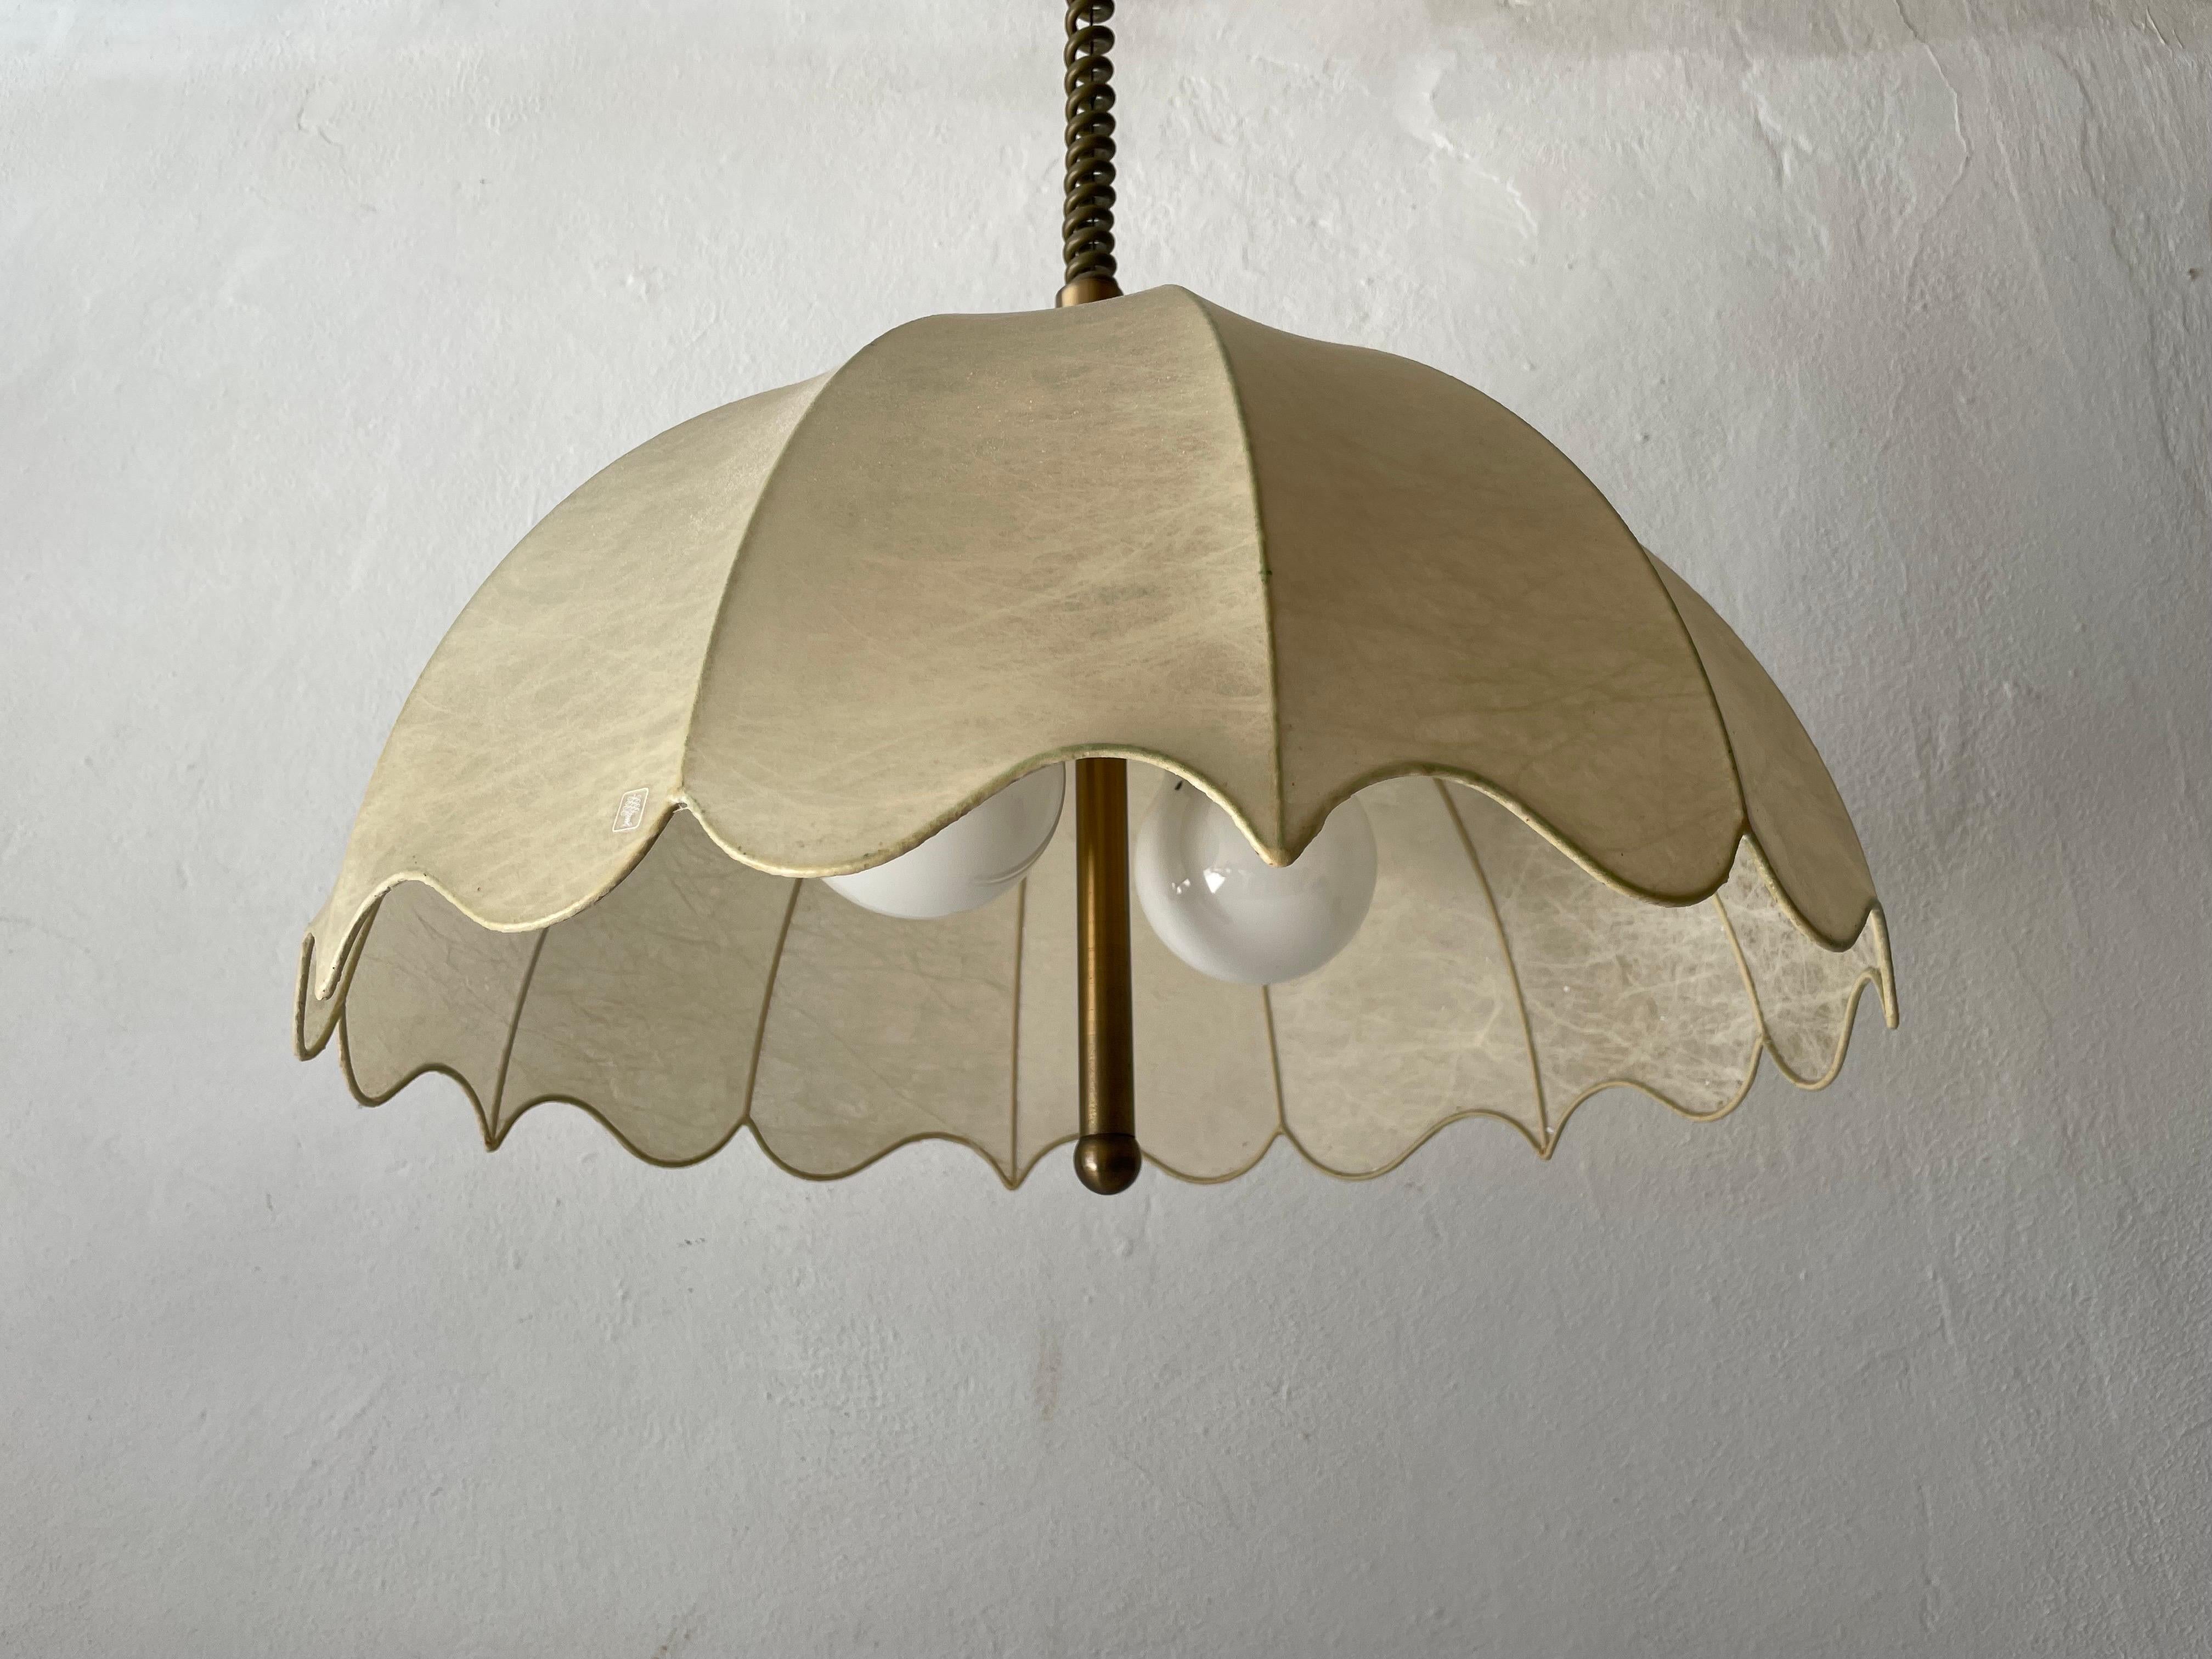 Cocoon pendant lamp by Goldkant, Castiglioni Era, 1960s, Germany

Lampshade is in very good vintage condition.

This lamp works with 2x E27 light bulbs. 
Wired and suitable to use with 220V and 110V for all countries.

Measurements:
Height